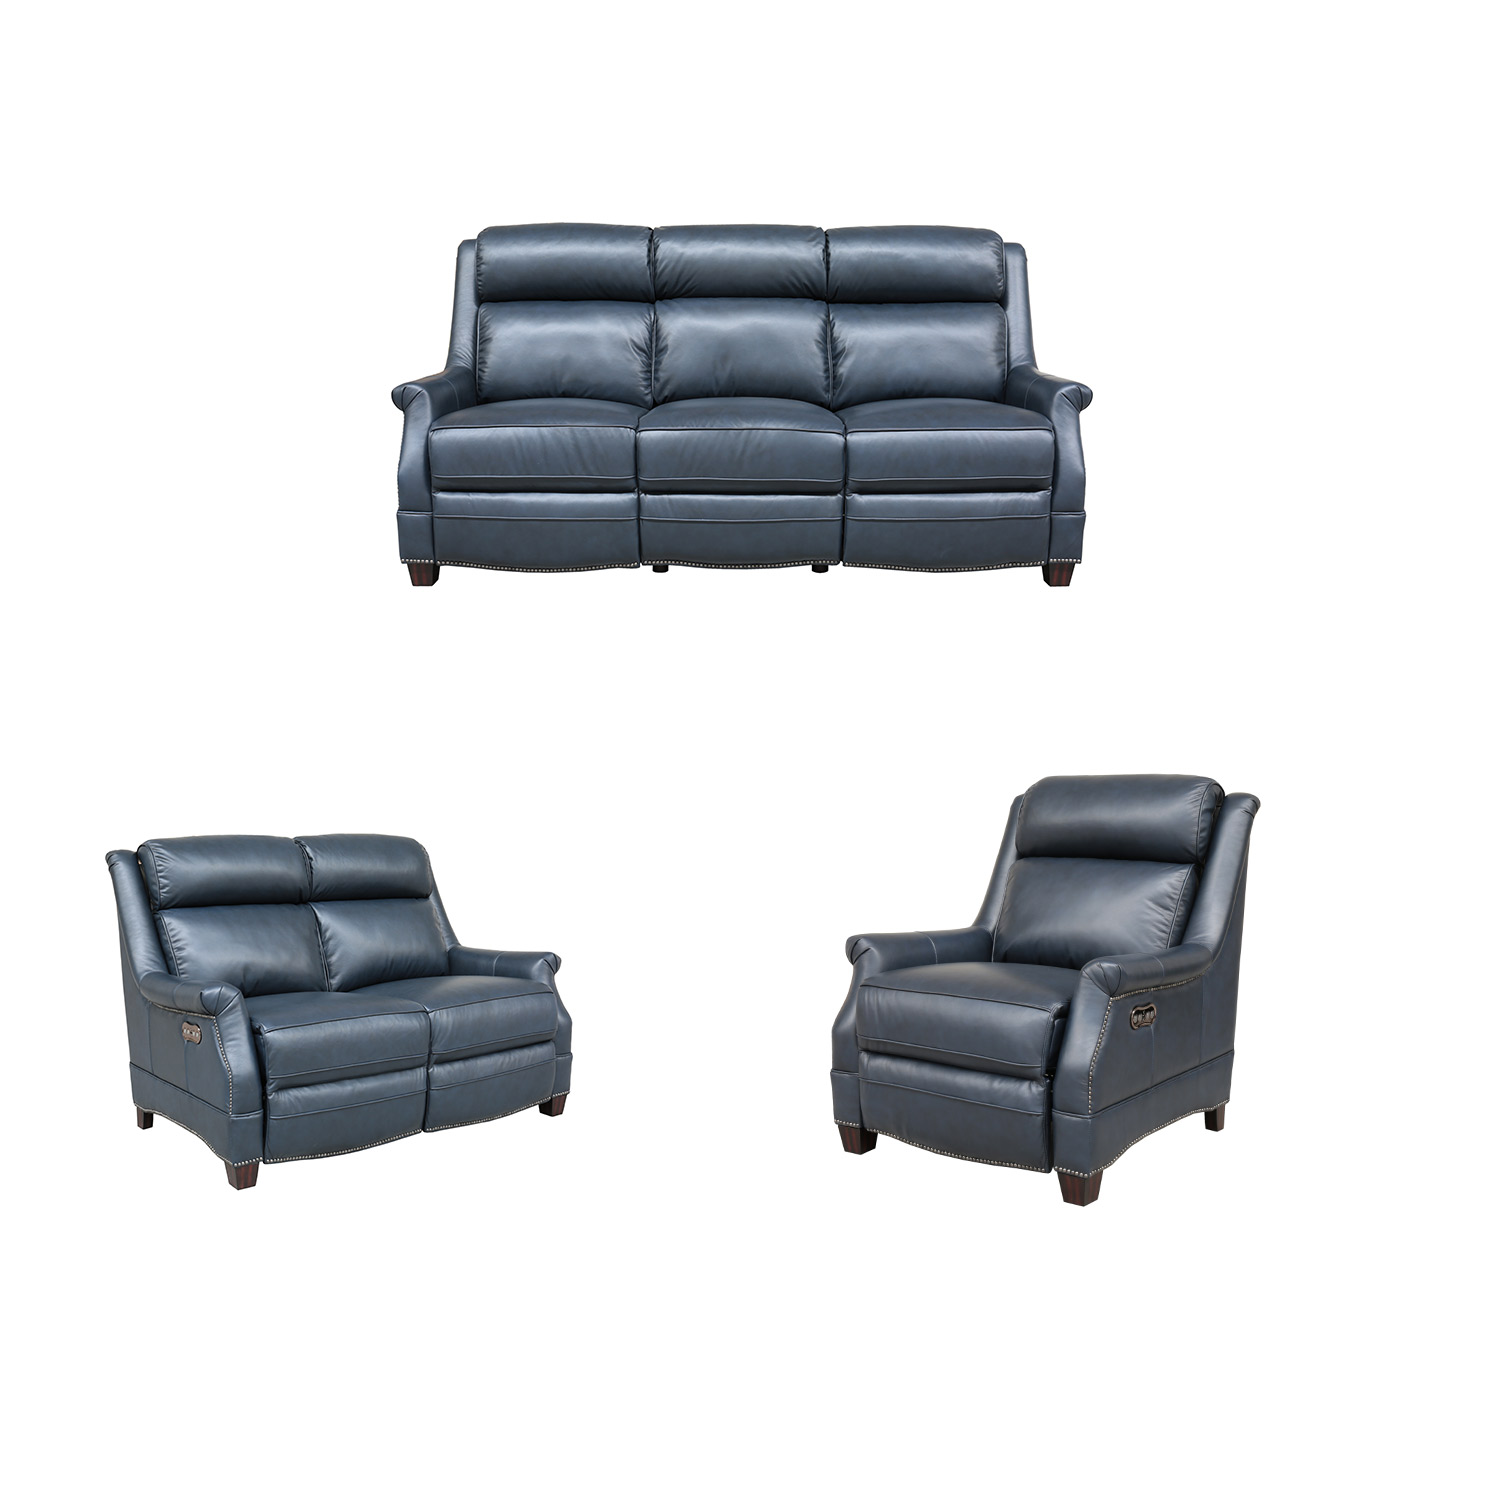 Barcalounger Warrendale Power Reclining Sofa Set with Power Head Rests - Shoreham Blue/All Leather